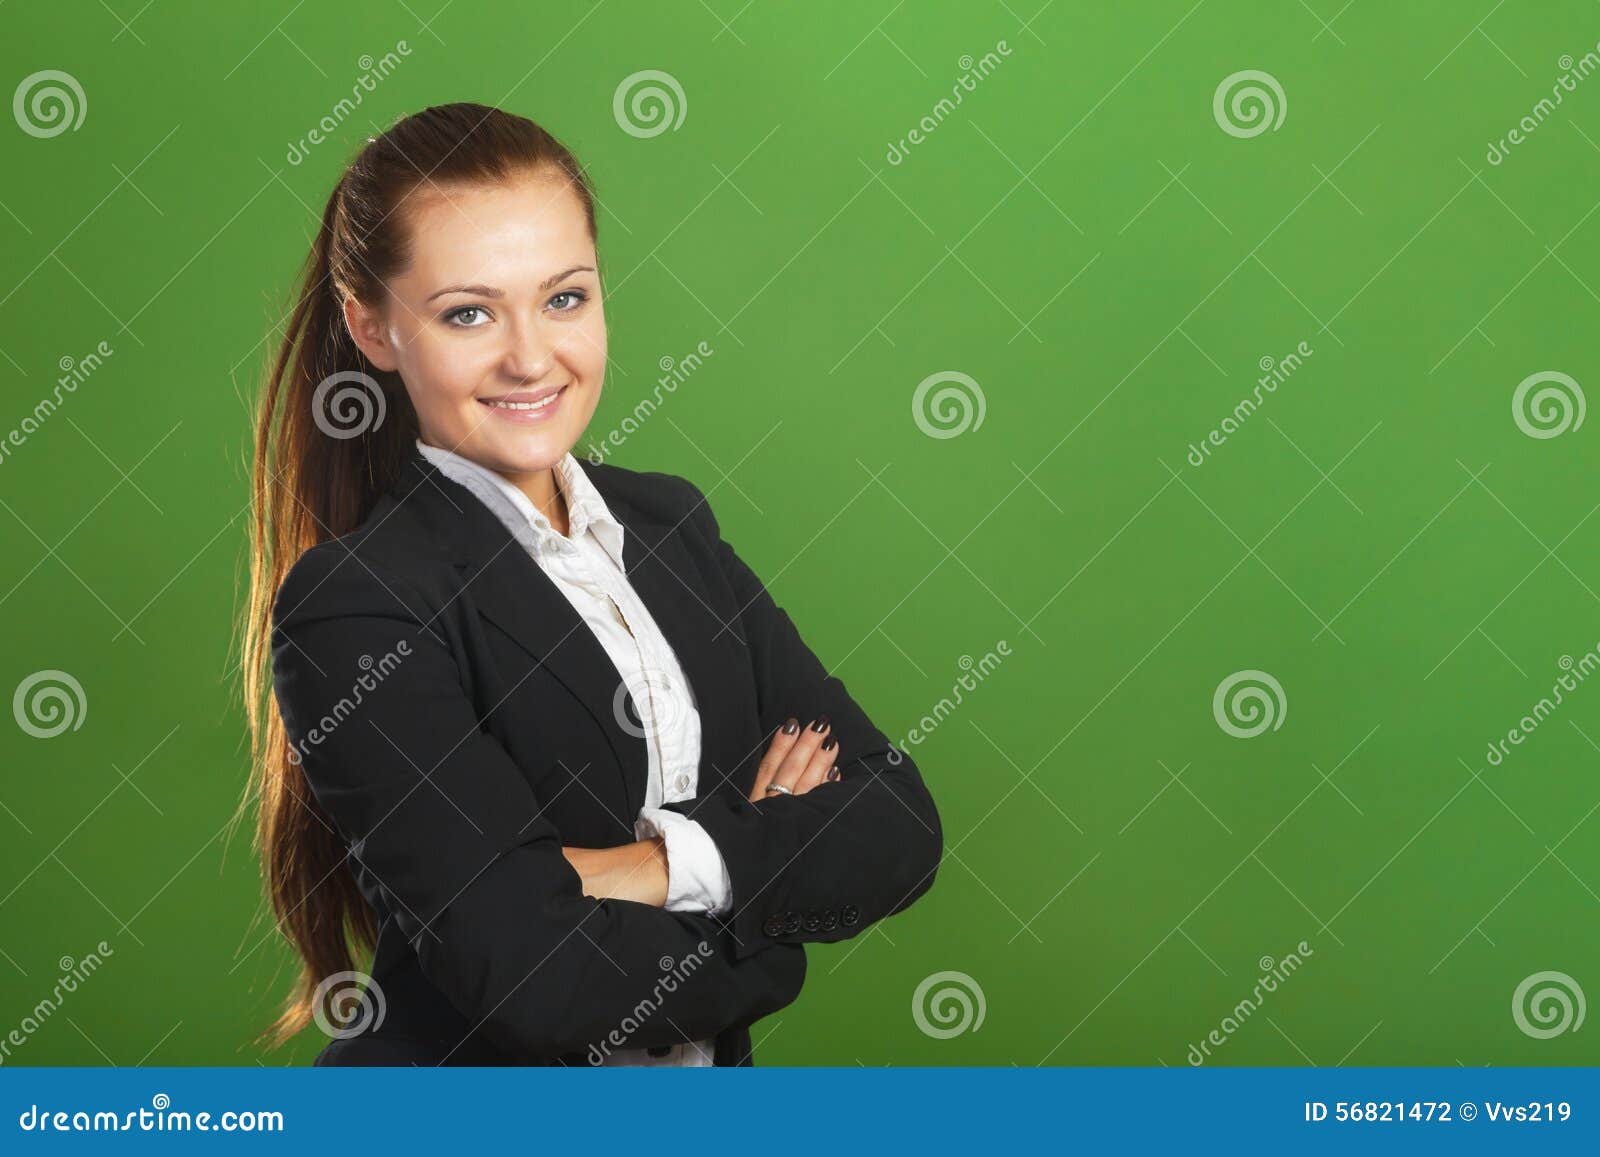 Business Woman On Green Background Stock Photo Image Of Lady